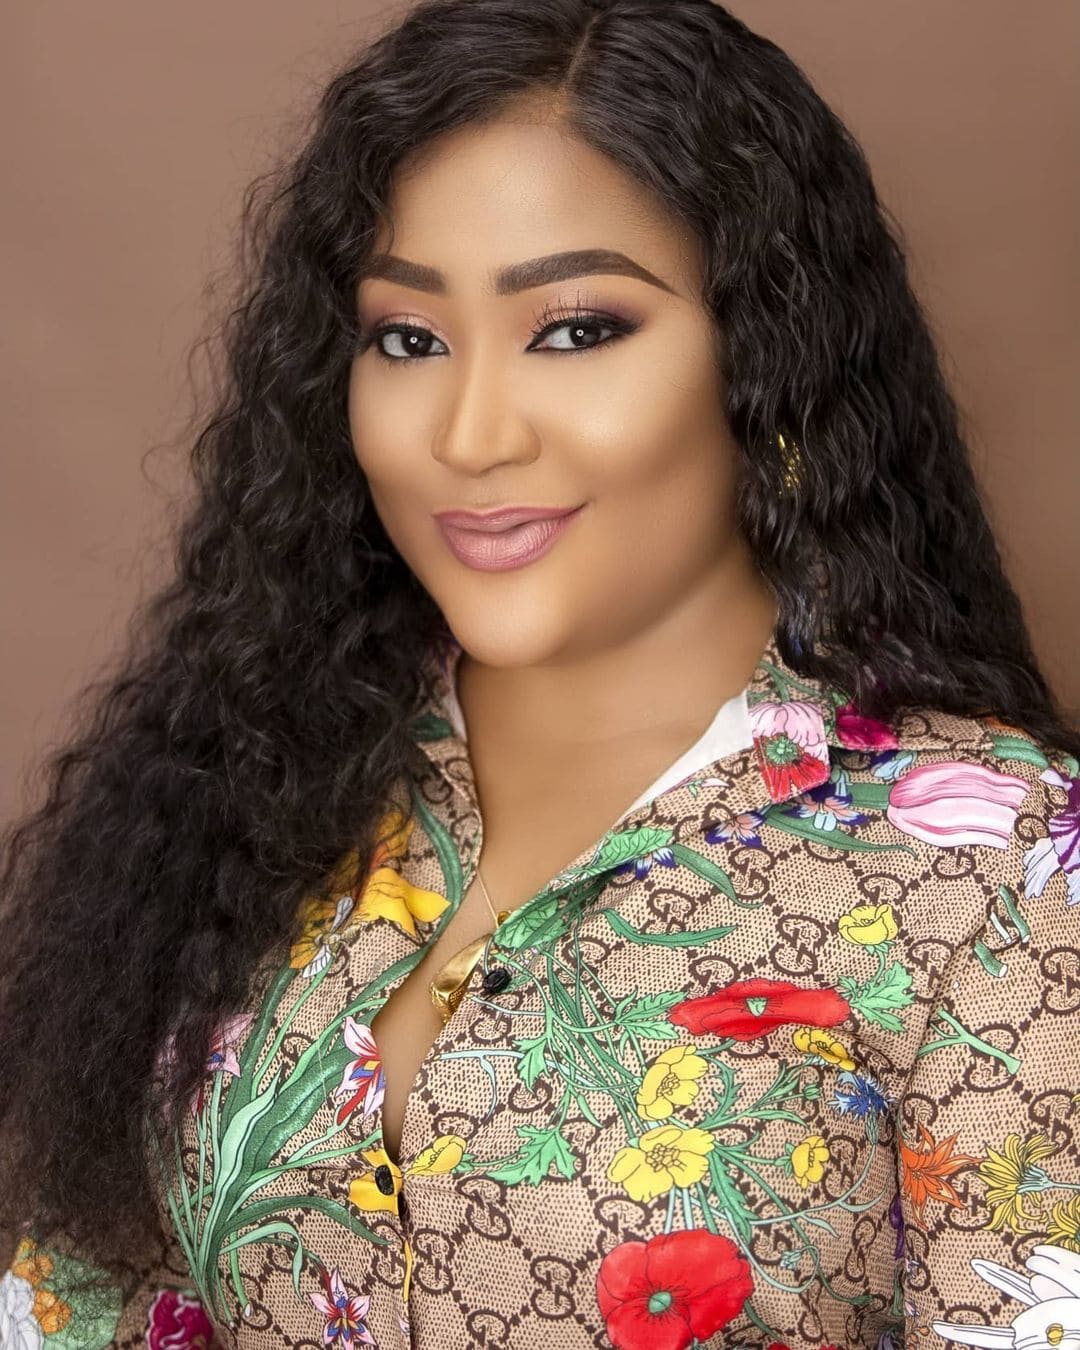 Uche Elendu Biography: Full Name, Age, Parents, Hometown, Husband, Net-Worth, Controversy, Career, Awards, Instagram, Facebook, Twitter